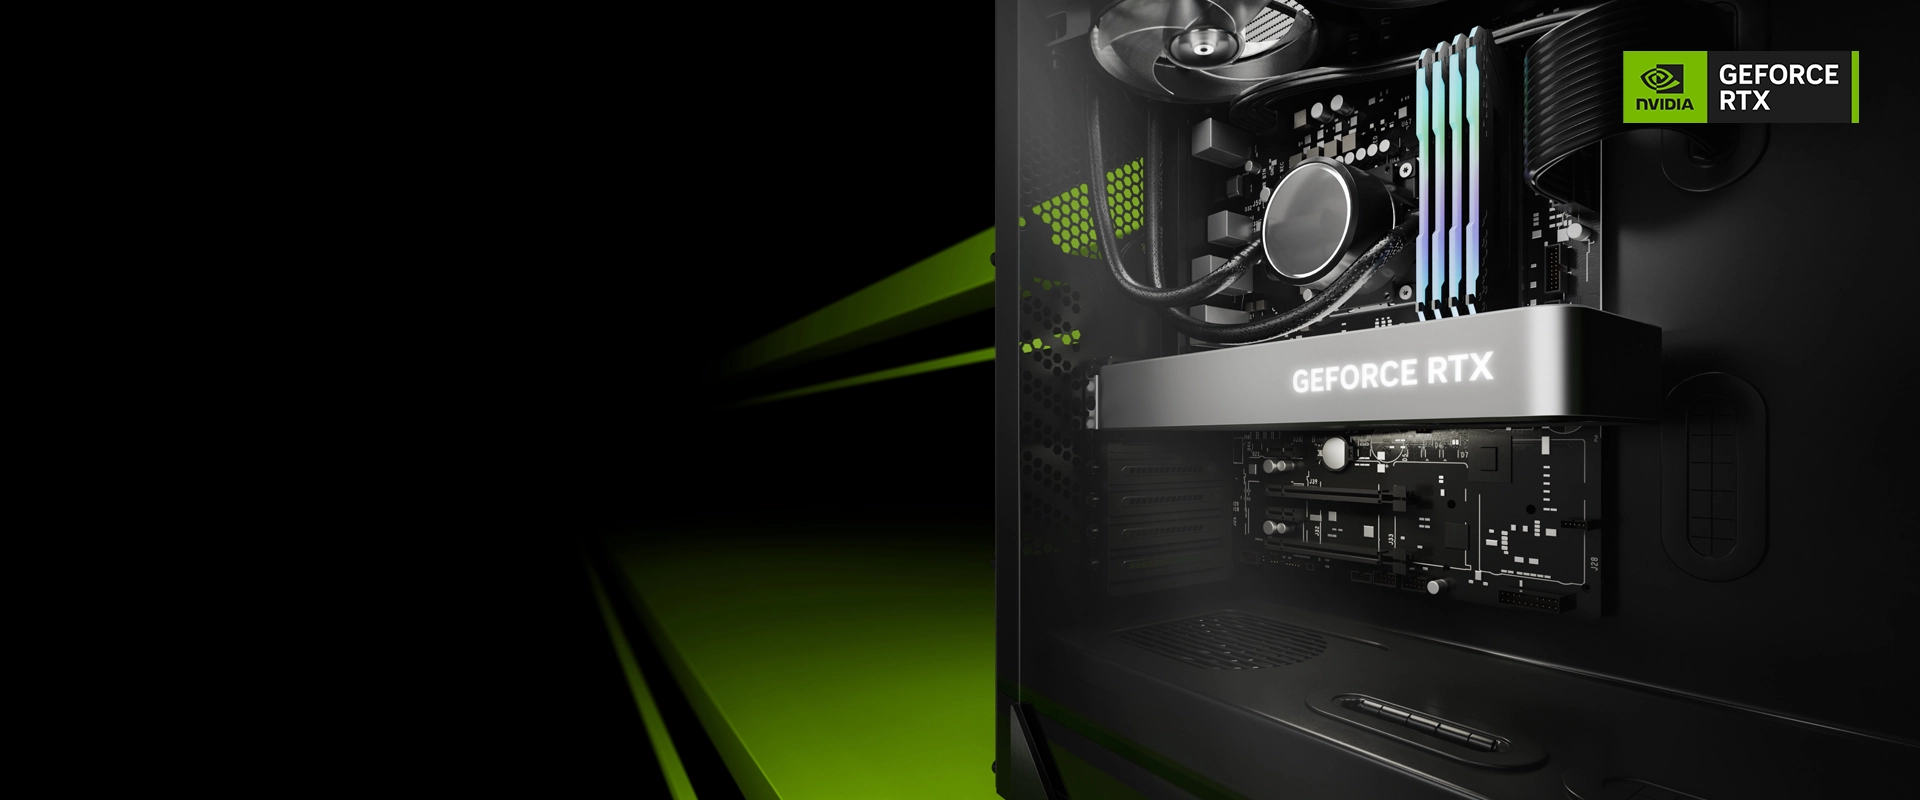 NVIDIA® GEFORCE RTX™ 4070 Ti Graphics Cards here at ORIGIN PC